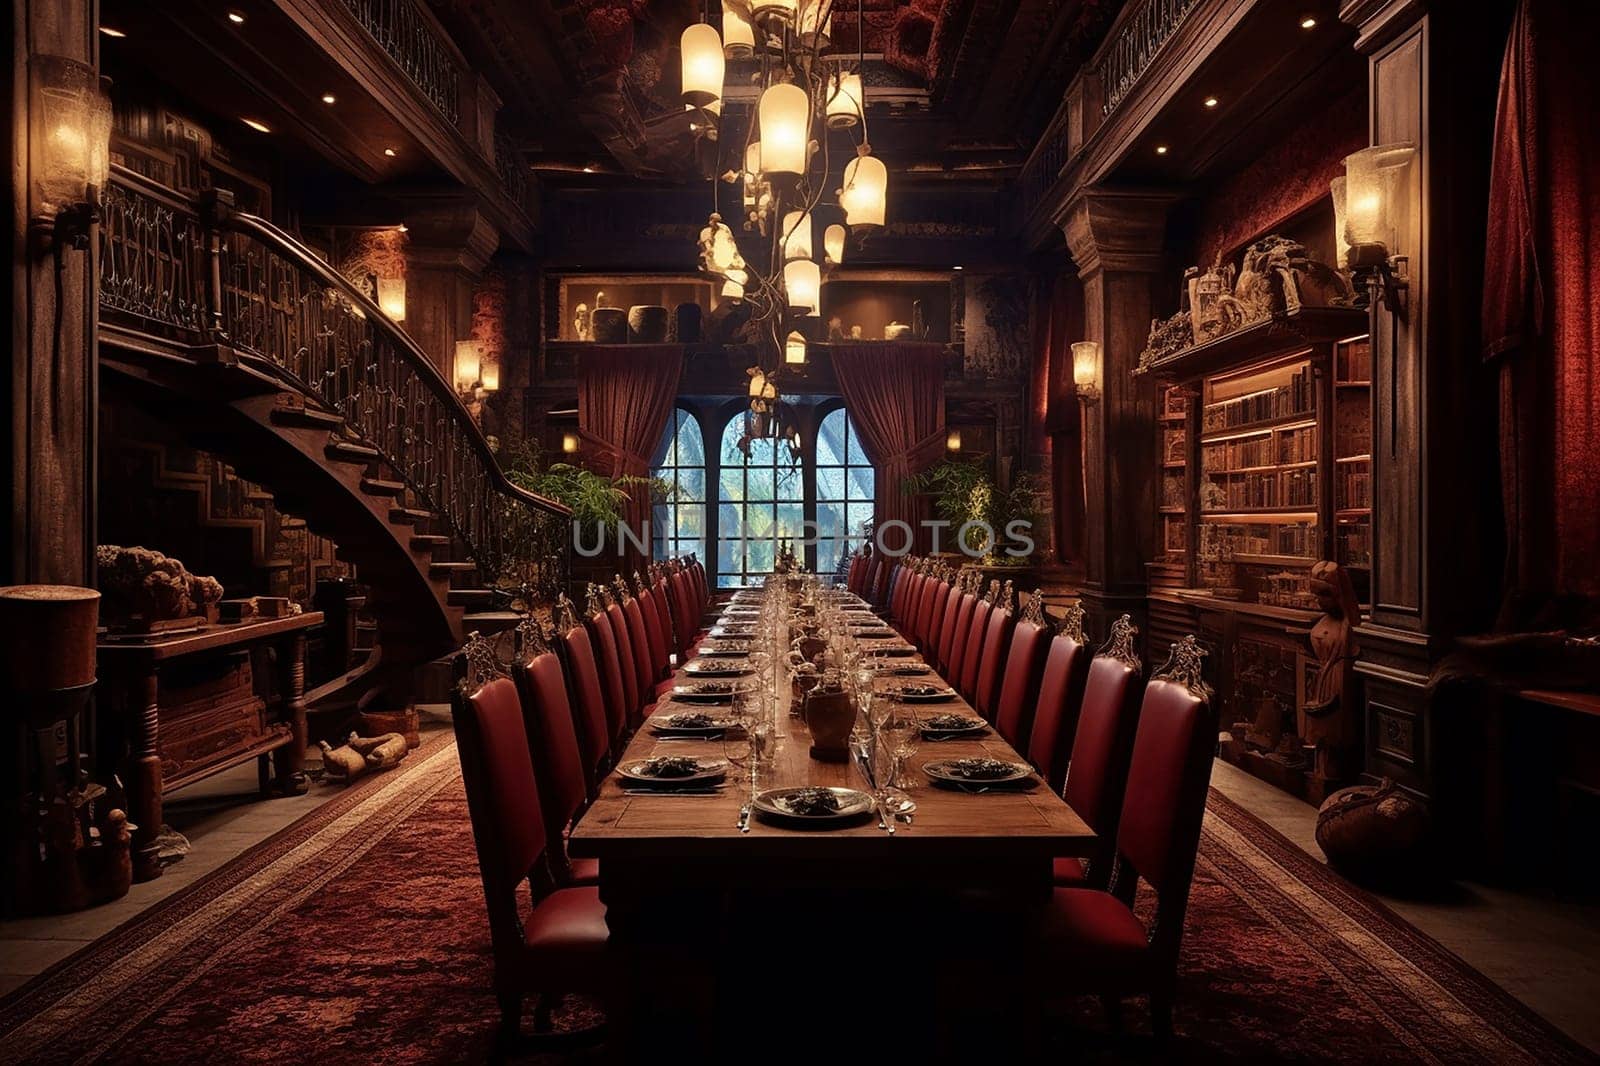 Elegant vintage dining room with a long table baroque style, red chairs, and grand staircase, lit by chandeliers.